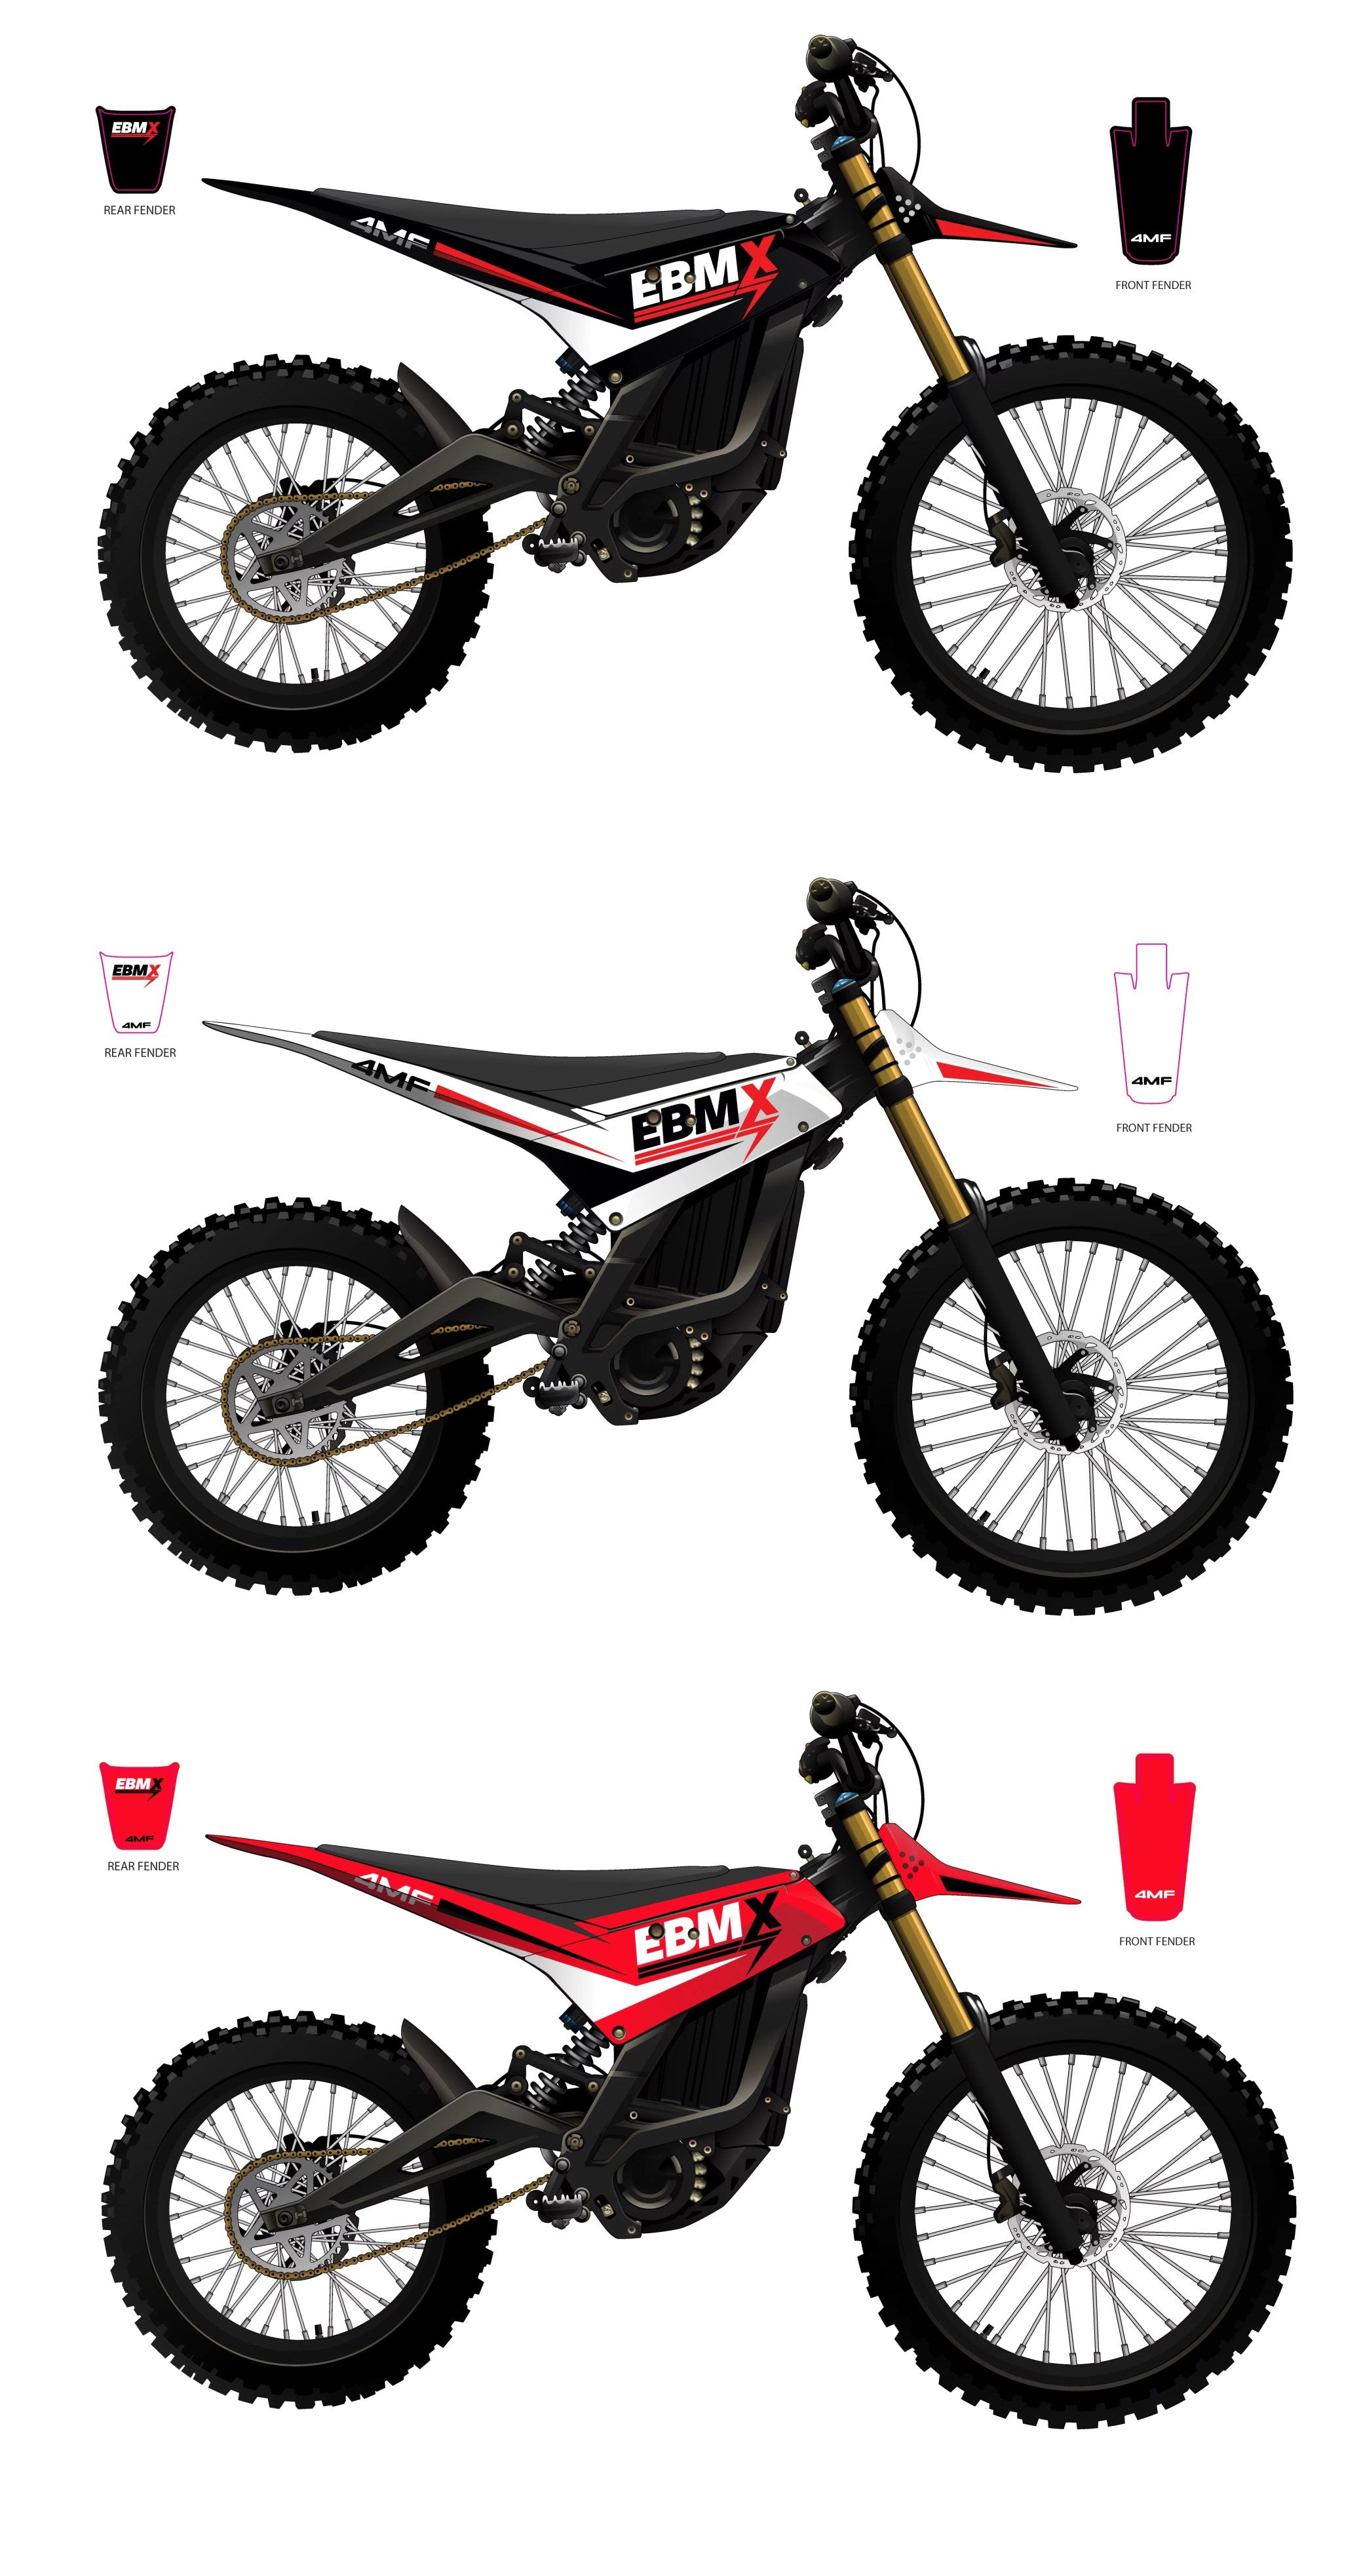 4M Foundry Moto Kits And 180 Decals for Surron